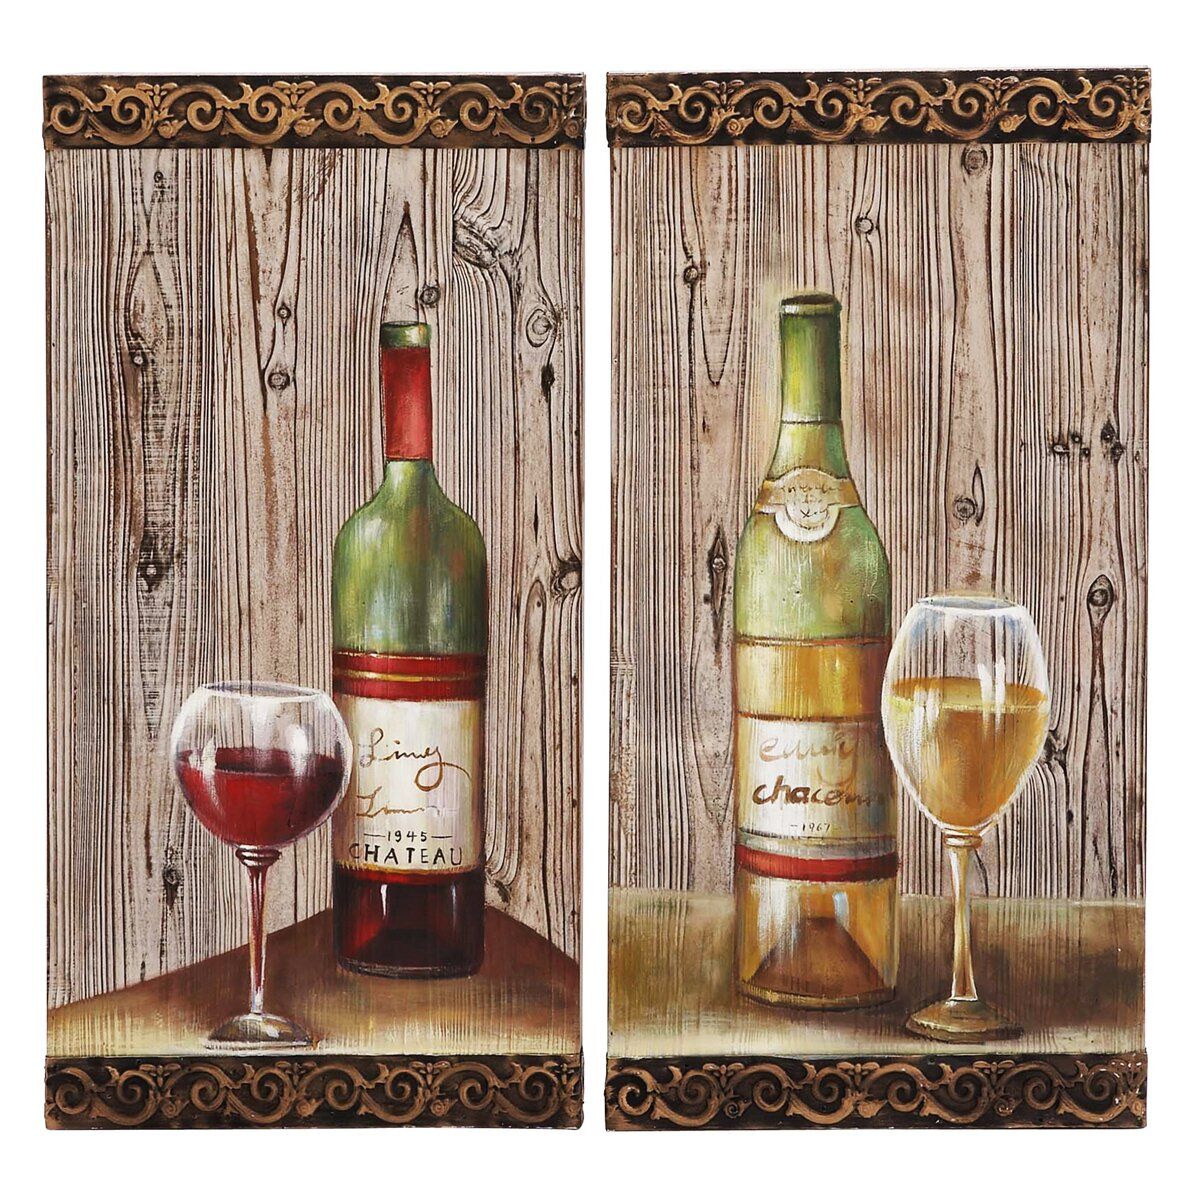 Urban Designs 2 Piece Le Chateu Wine Bottles Wood Wall Decor Set | Wayfair For Latest Wine Wall Art (View 6 of 20)